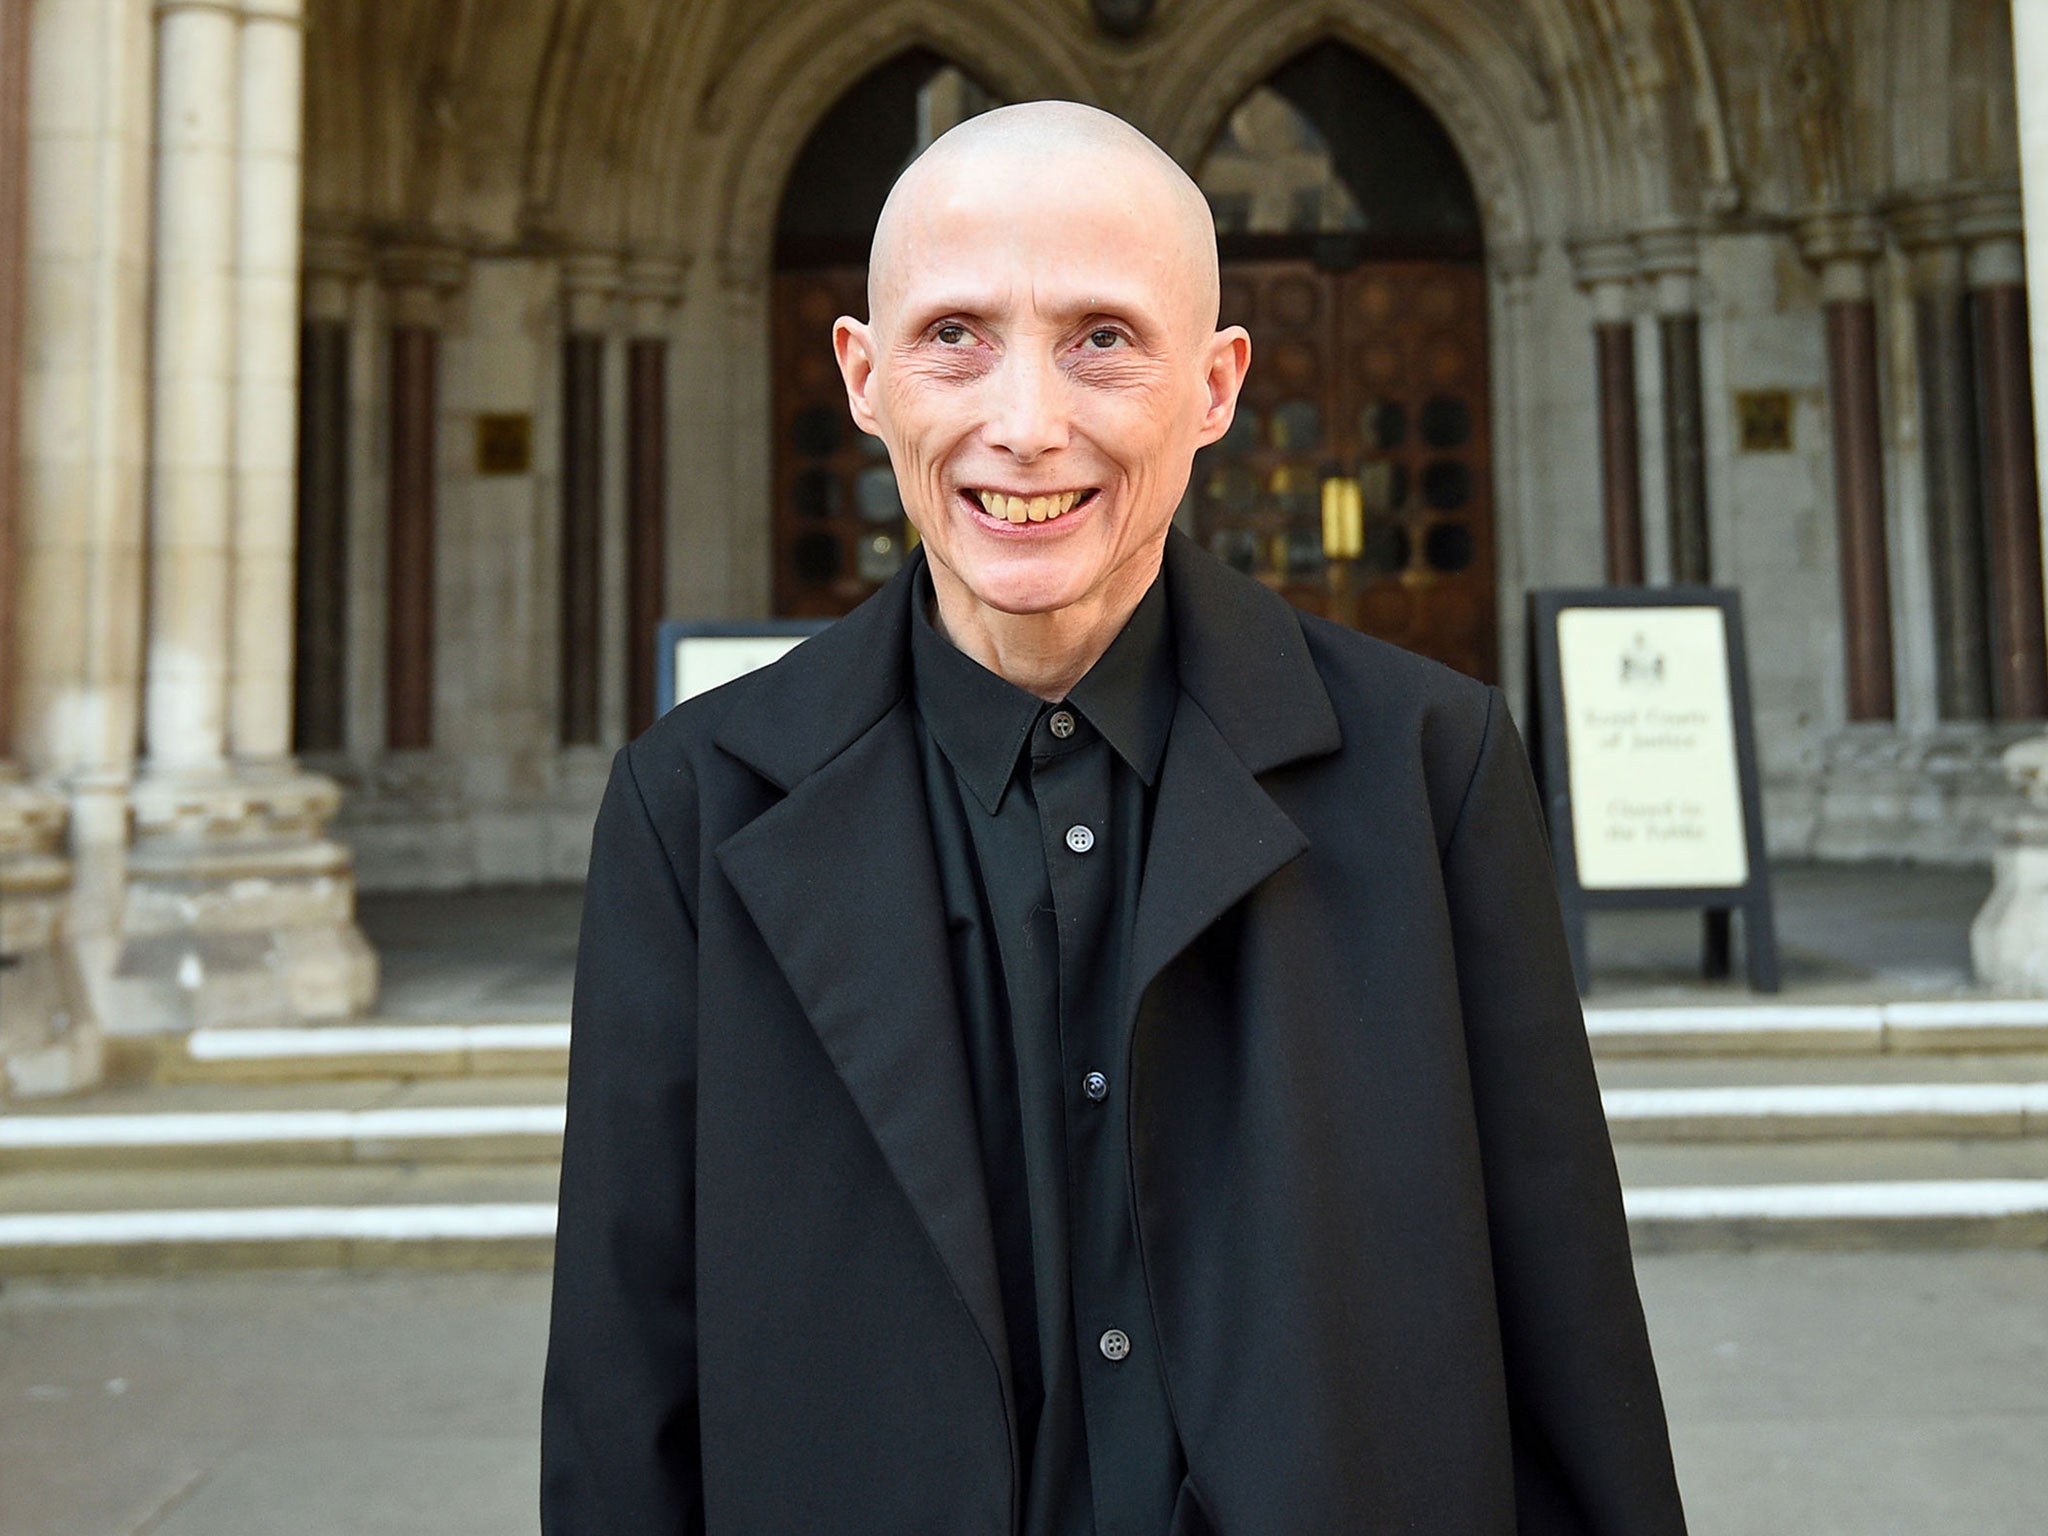 Christie Elan-Cane, who is campaigning for gender-neutral passports, outside the Royal Courts of Justice in London